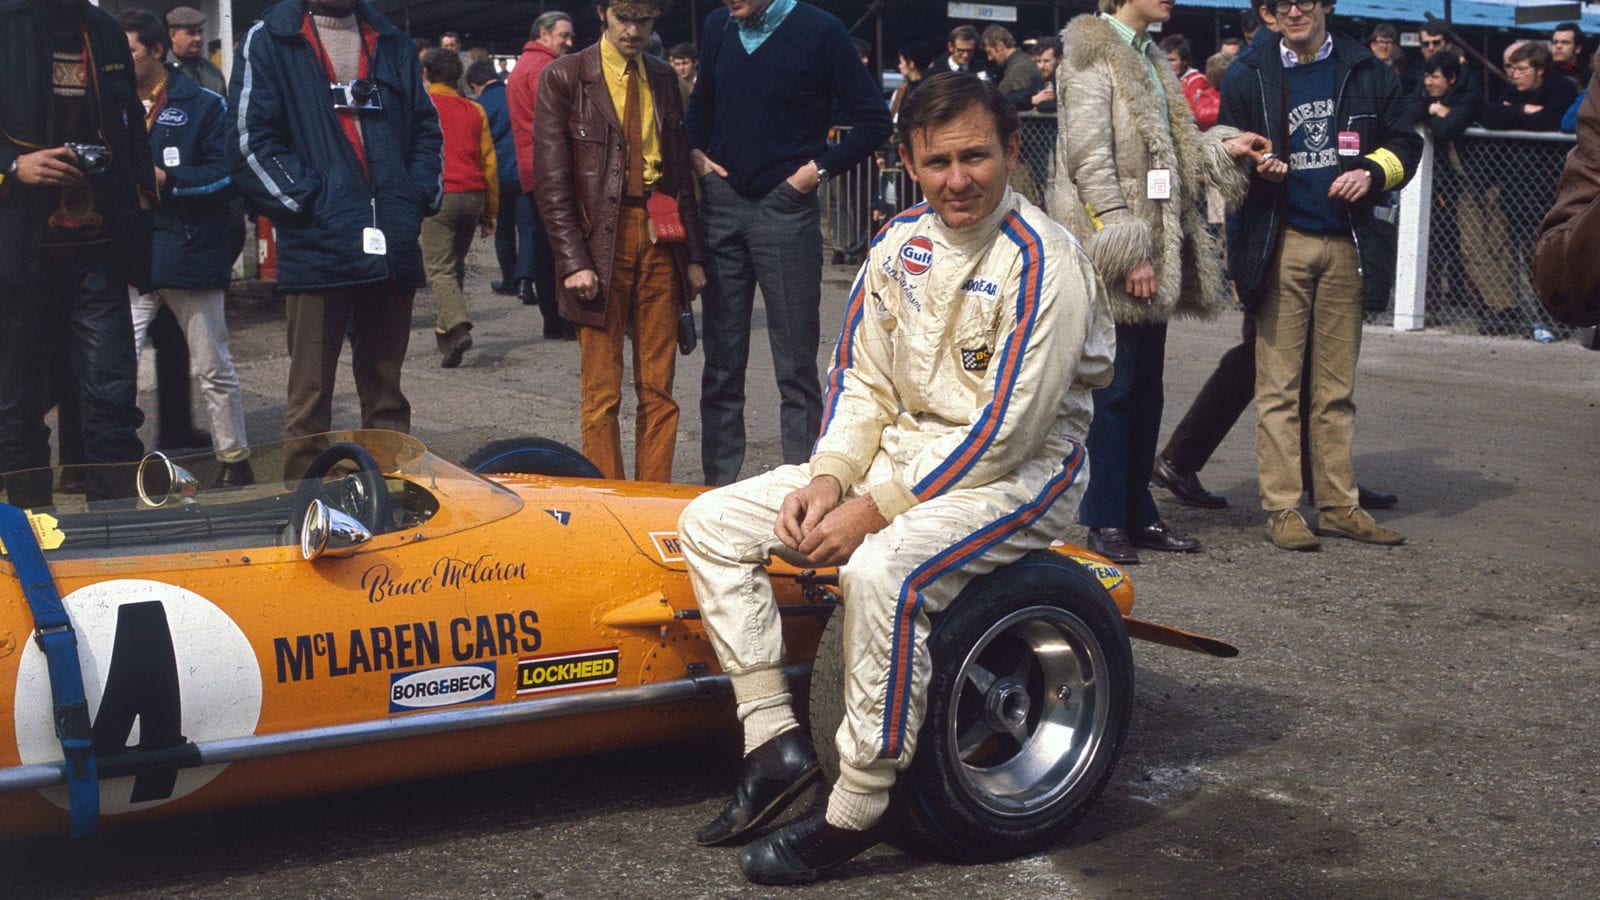 March 1970: New Zealand motor-racing driver Bruce McLaren (1937 - 1970) sits on the wheel of his McLaren-Ford M14A before the start of the Race of Champions at Brands Hatch in Kent. (Photo by Fox Photos/Getty Images)